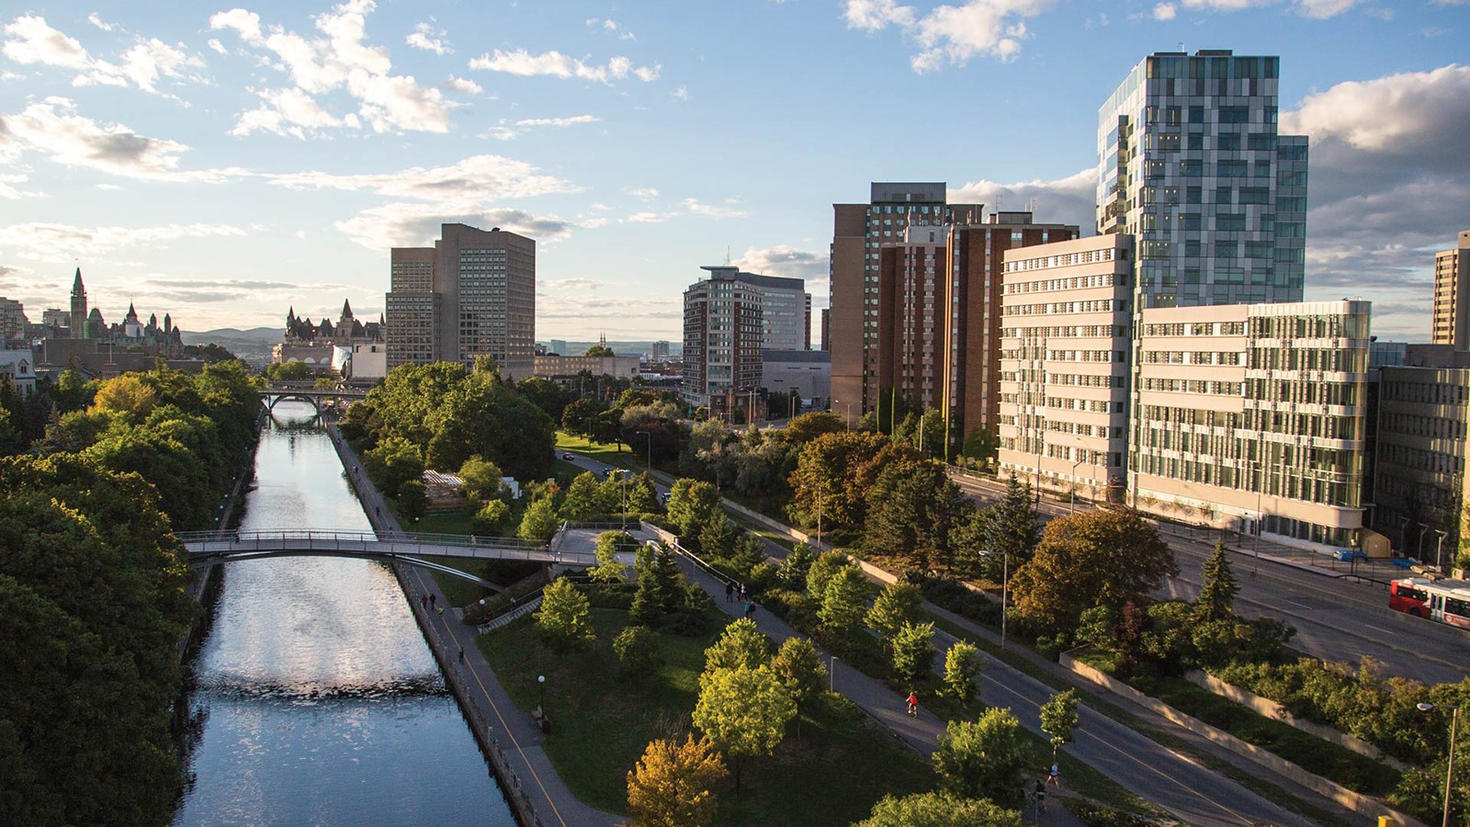 uOttawa campus and the Rideau canal